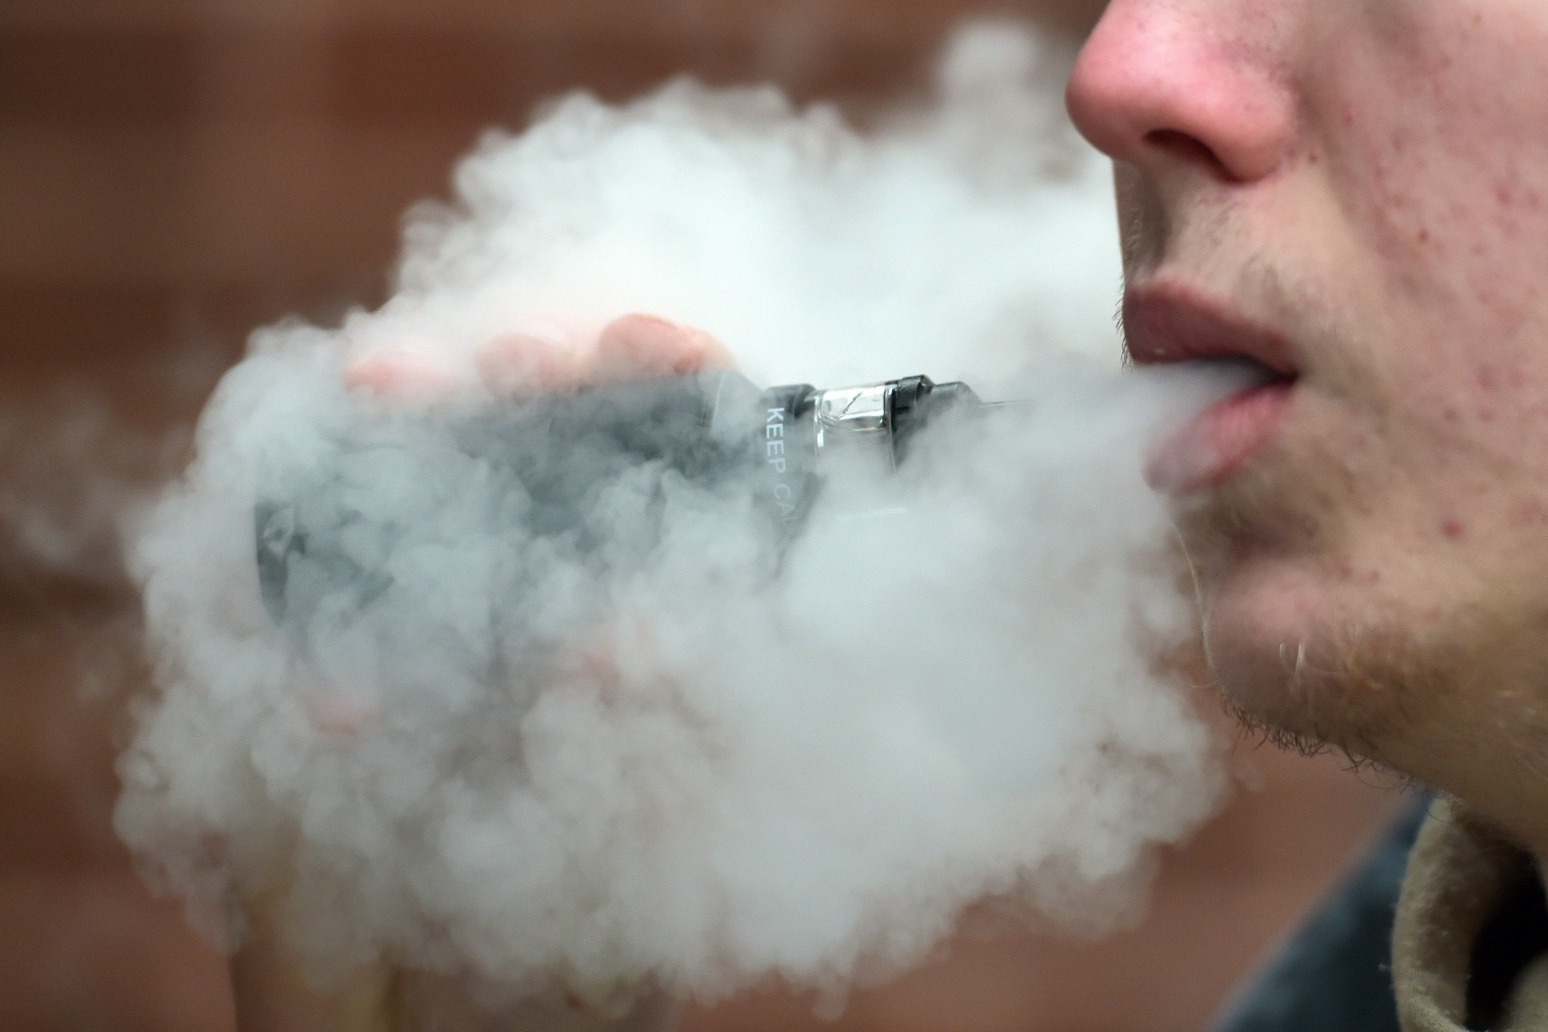 Vaping damages arteries and blood vessels like smoking 